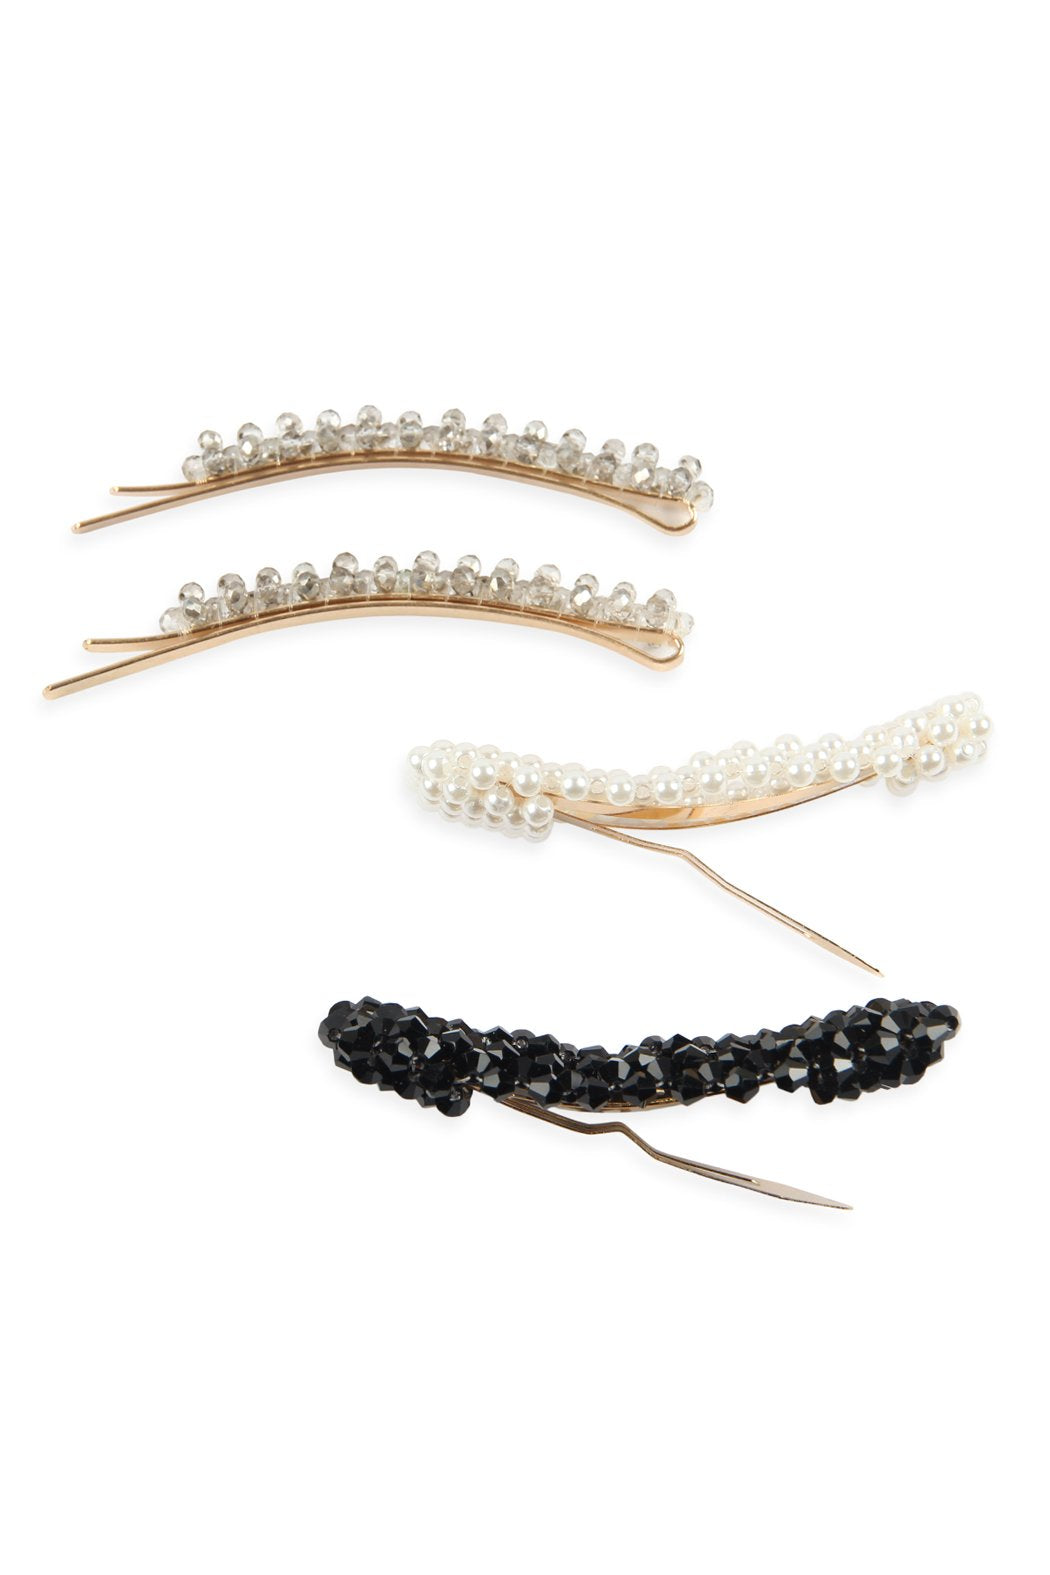 Glass Beads and Pearl Hair Pin Set